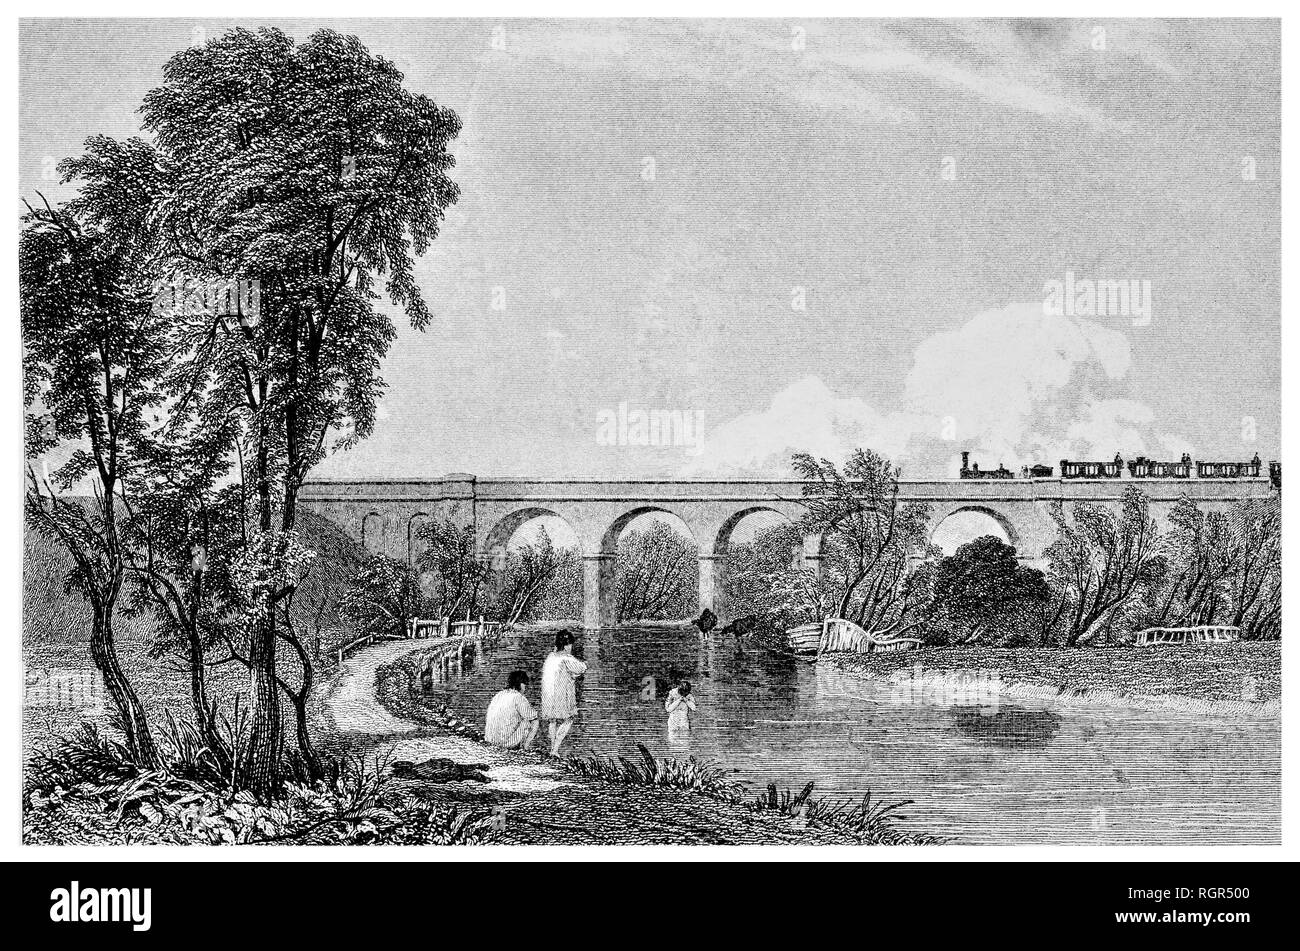 Viaduct over the river Colne near Watford steam train with passengers and bathing in the river Stock Photo